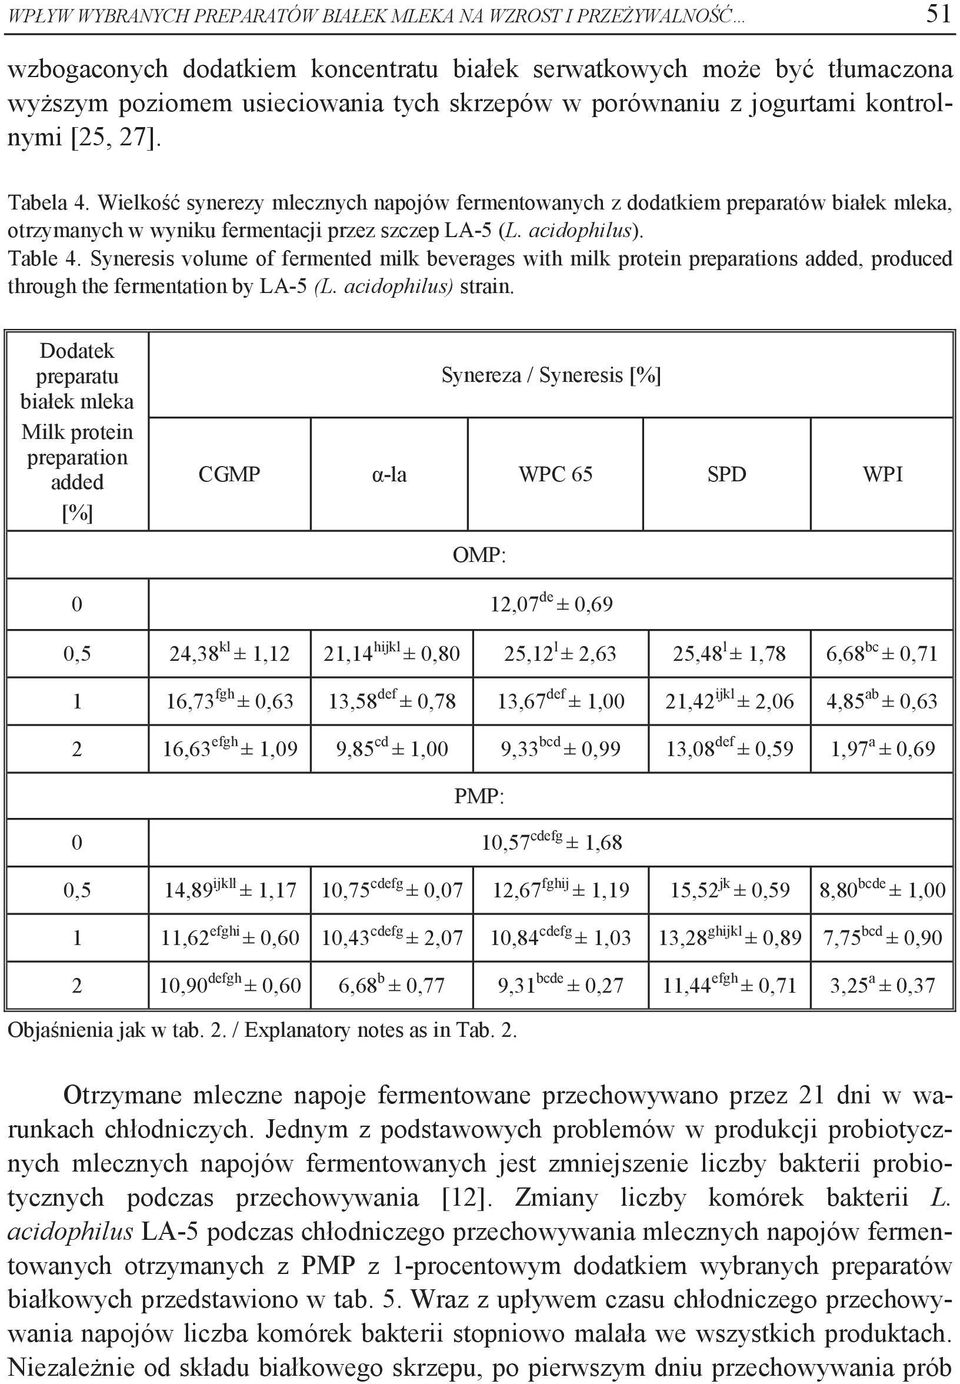 acidophilus). Table 4. Syneresis volume of fermented milk beverages with milk protein preparations added, produced through the fermentation by LA-5 (L. acidophilus) strain.